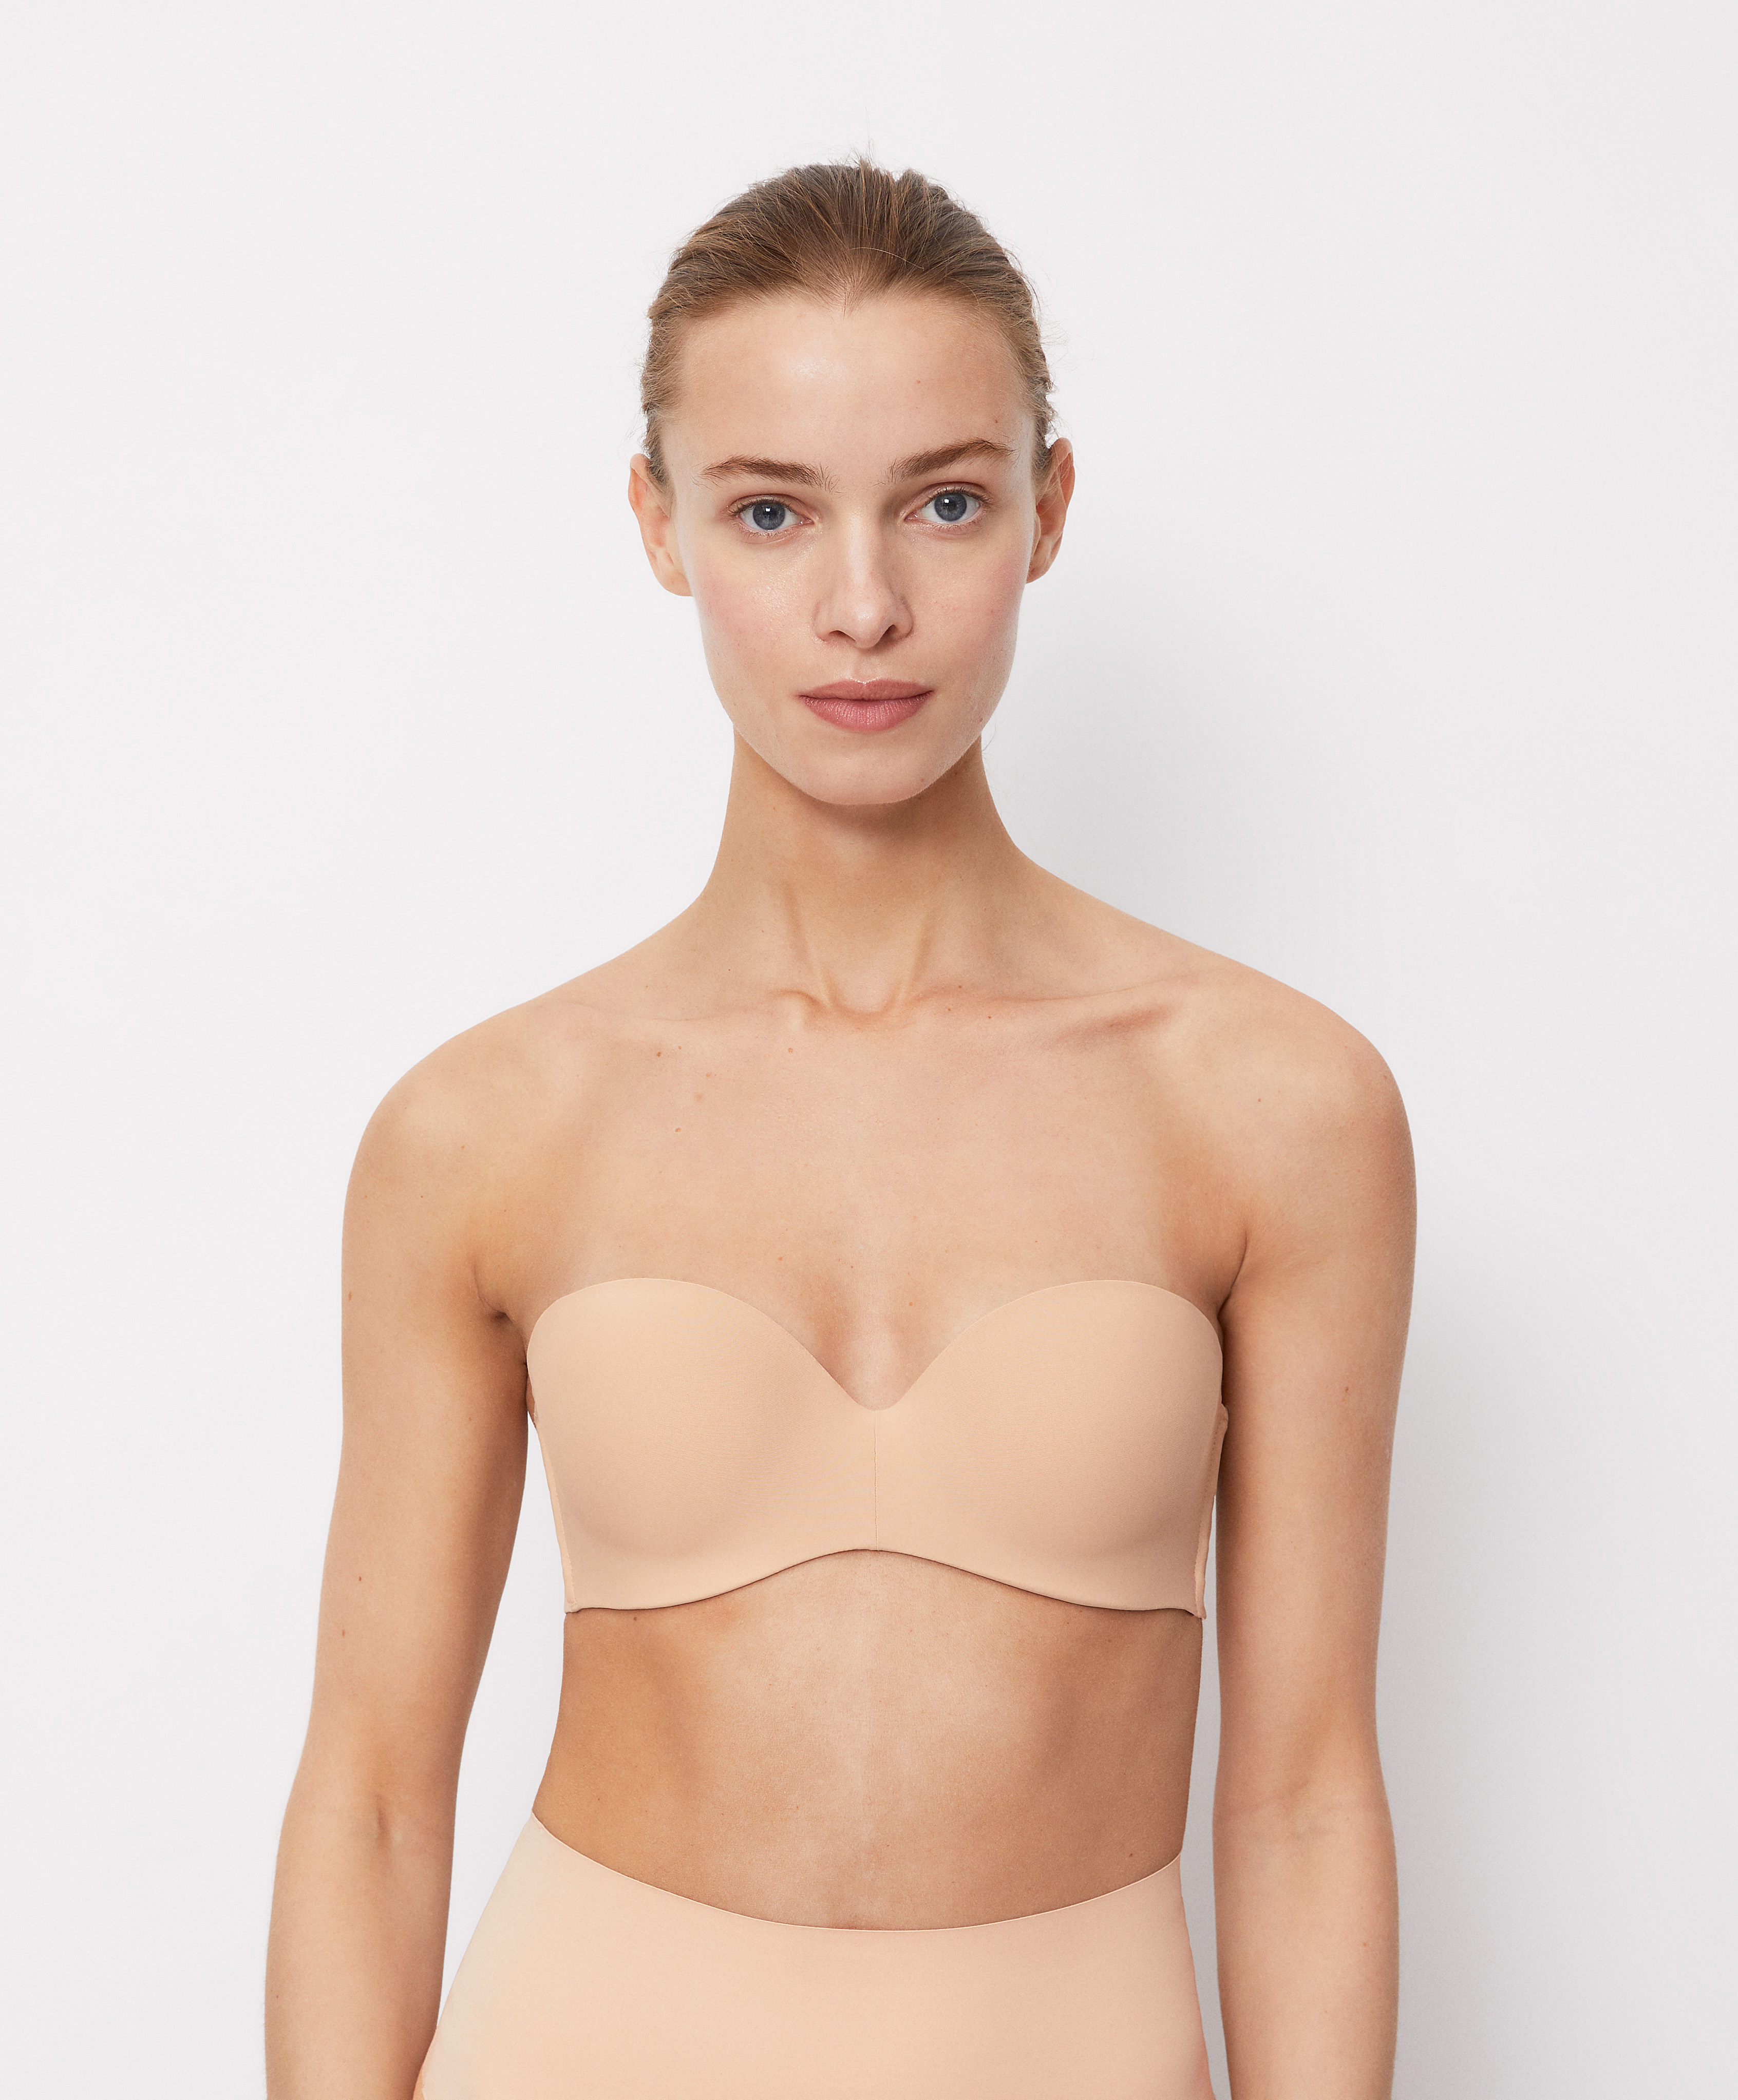 Polyamide push-up bra with removable straps